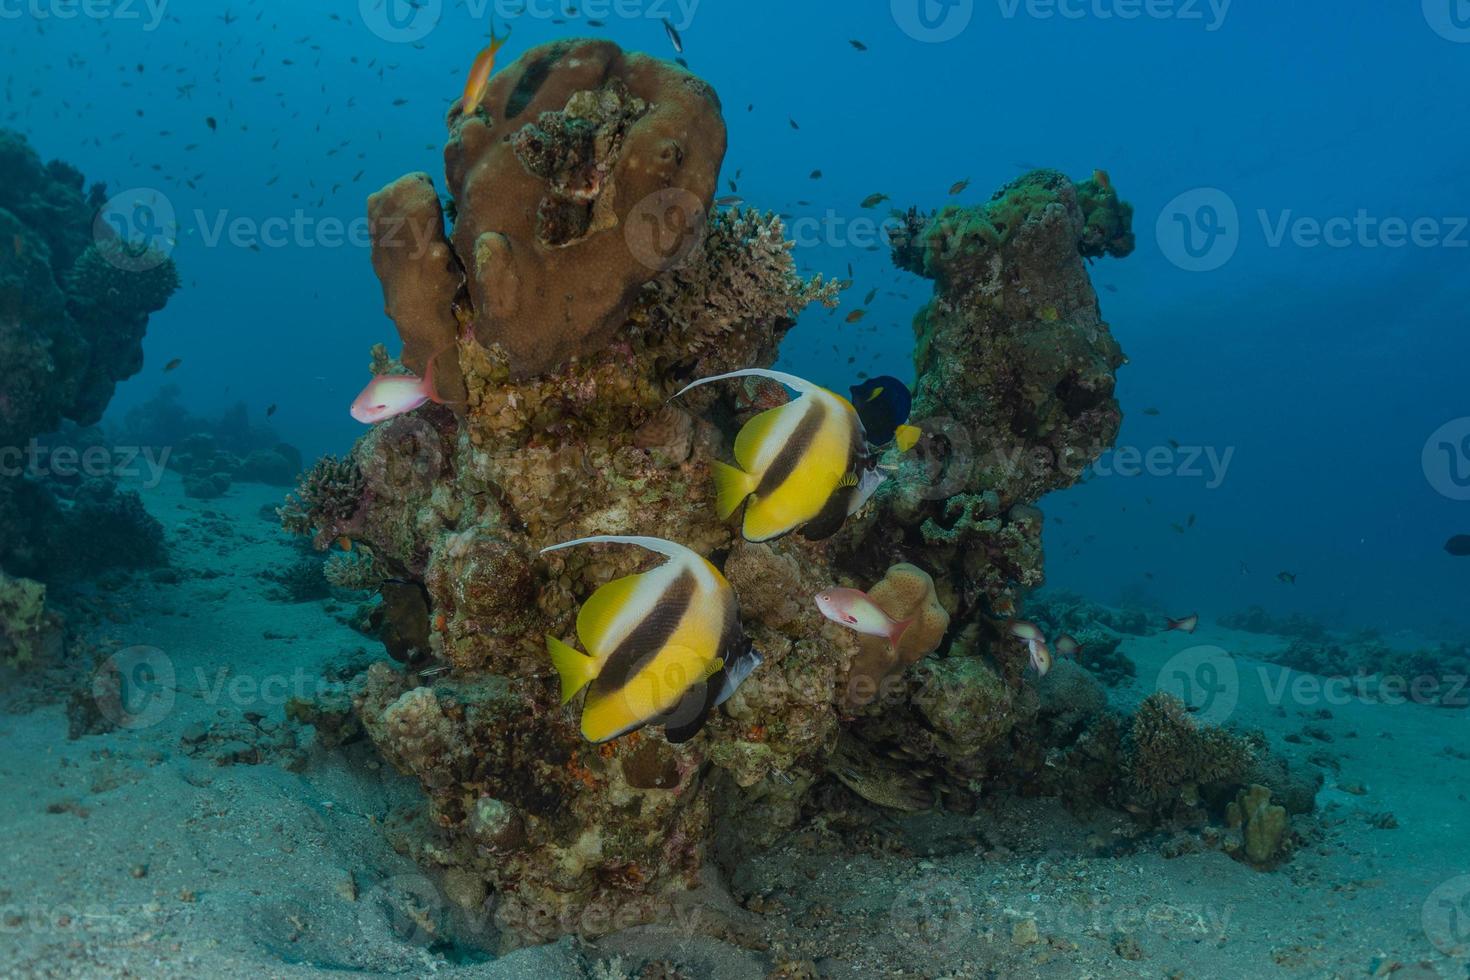 Fish swim in the Red Sea, colorful fish, Eilat Israel photo